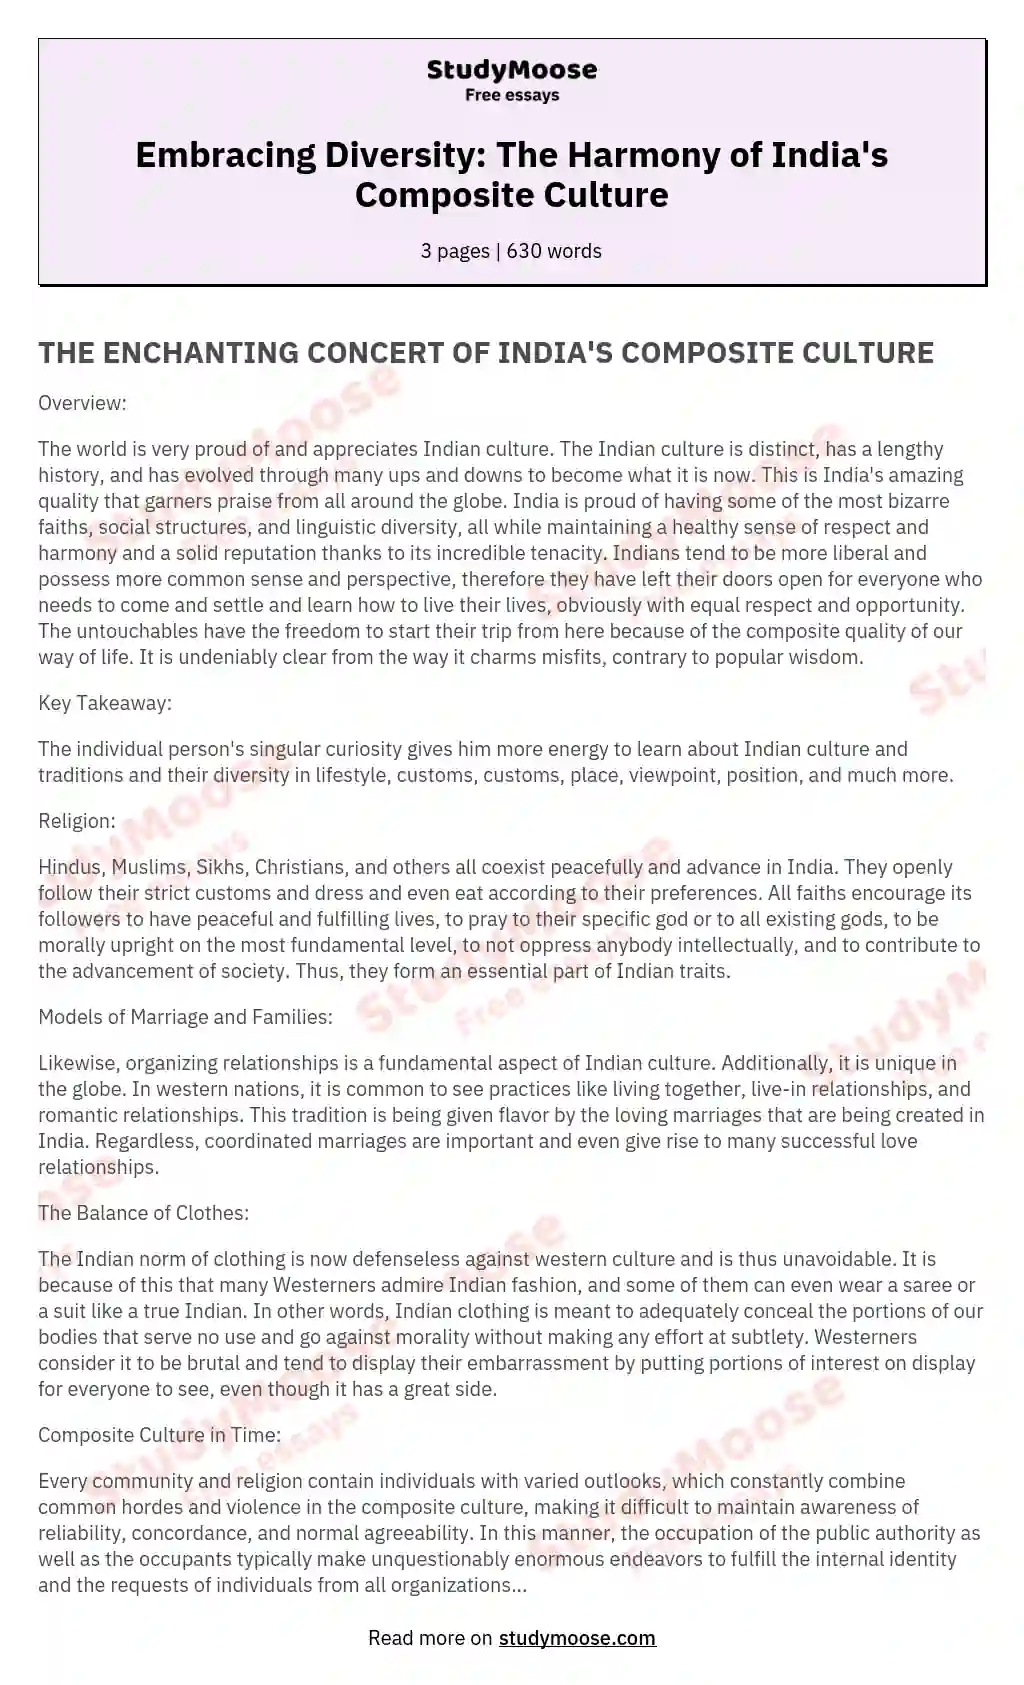 Embracing Diversity: The Harmony of India's Composite Culture essay